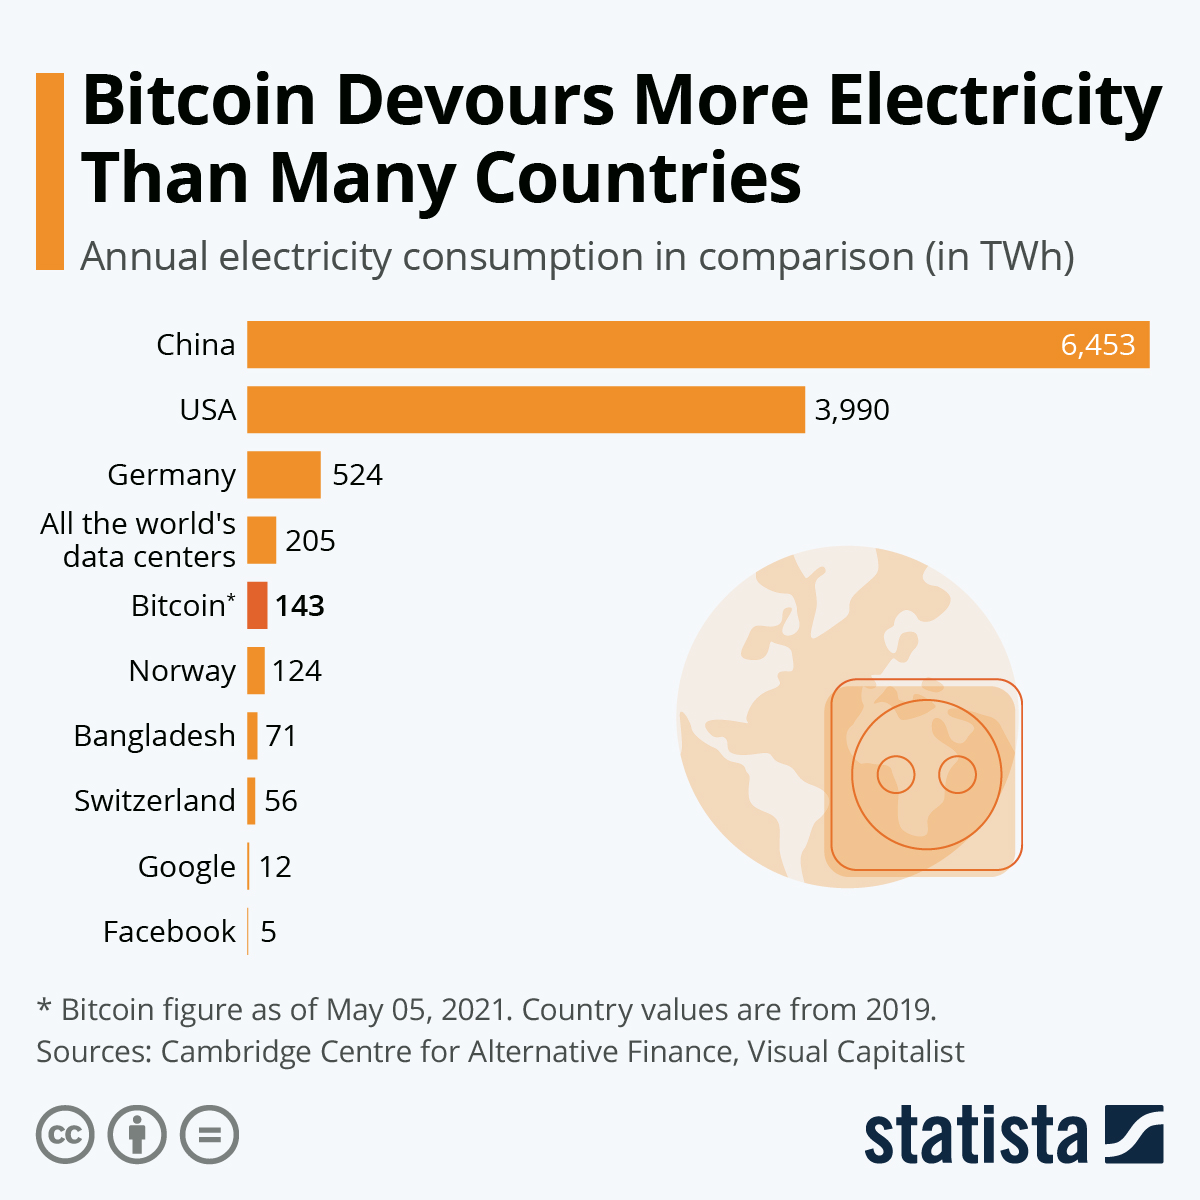 Bitcoin Energy Usage in 2021